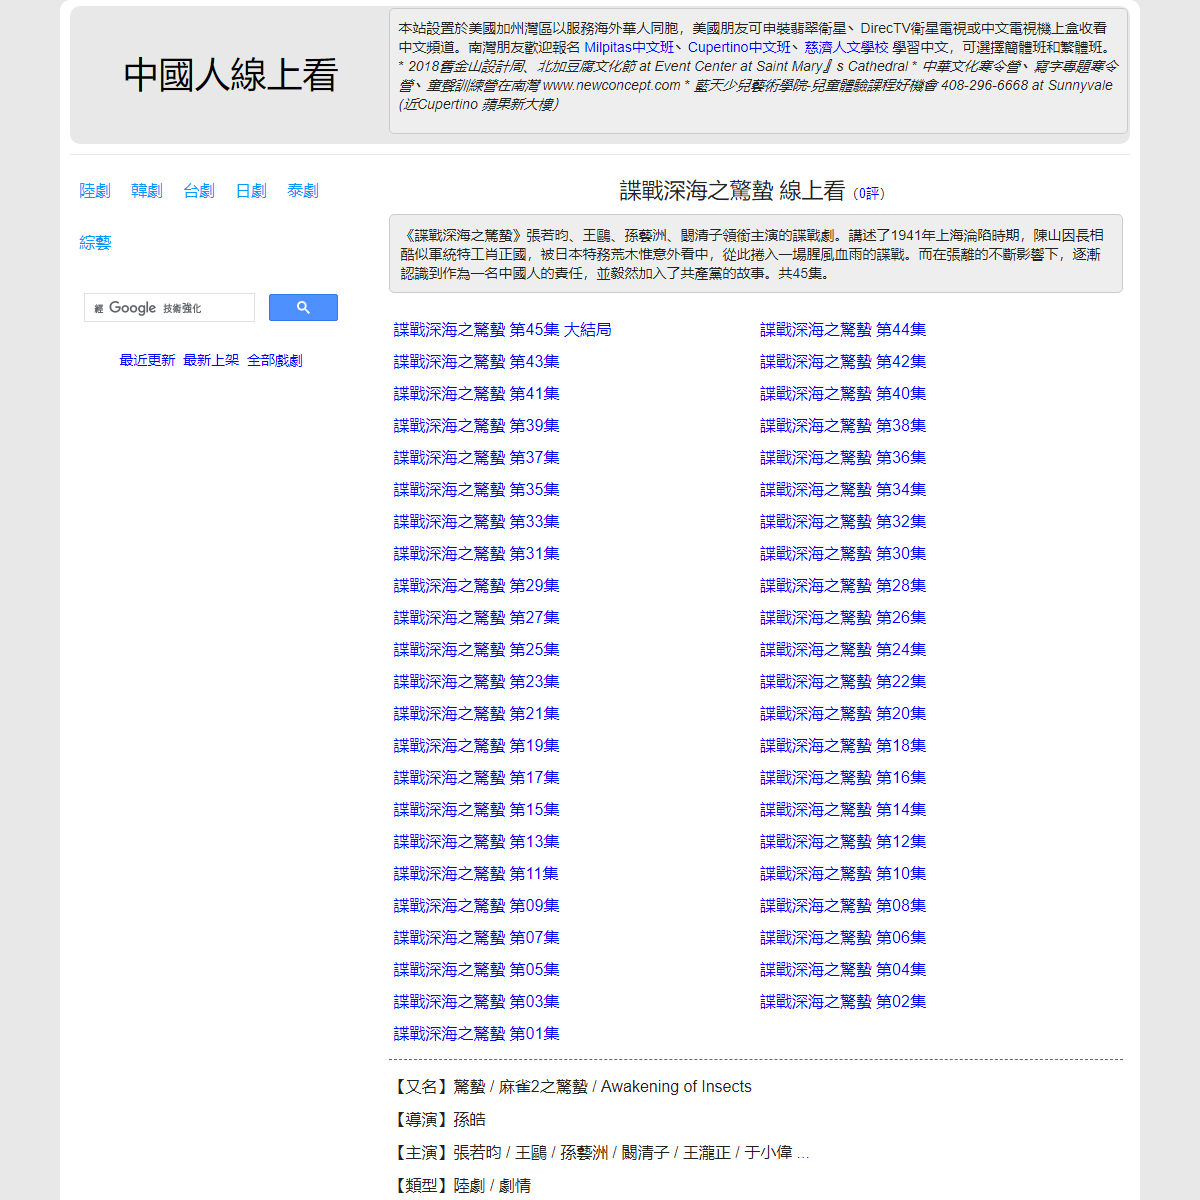 A complete backup of https://chinaq.tv/cn191022b/